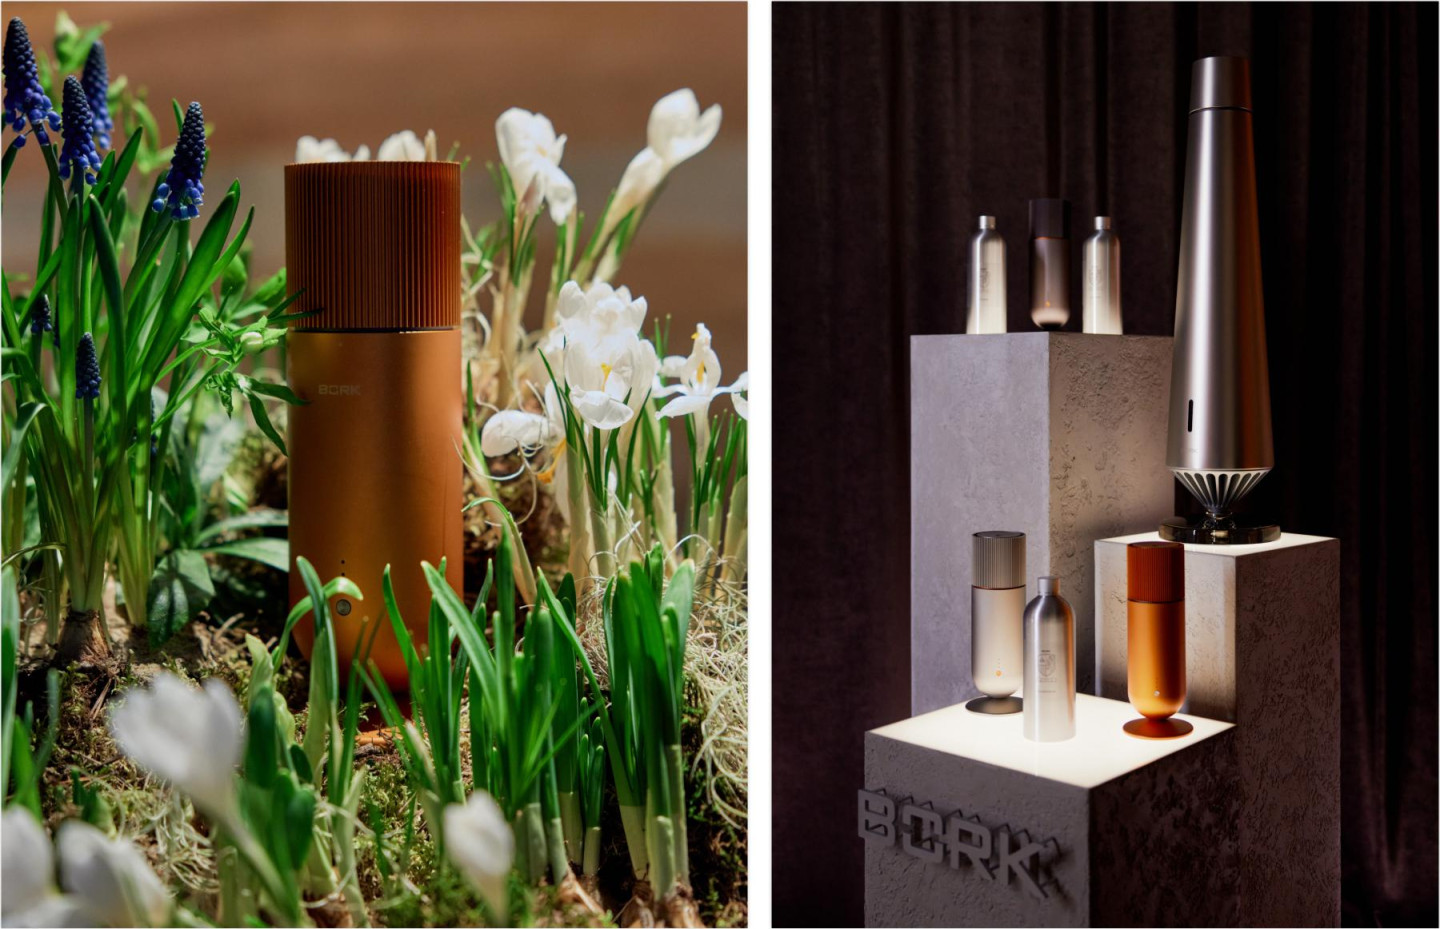 BORK presented aroma stations and a line of home fragrances